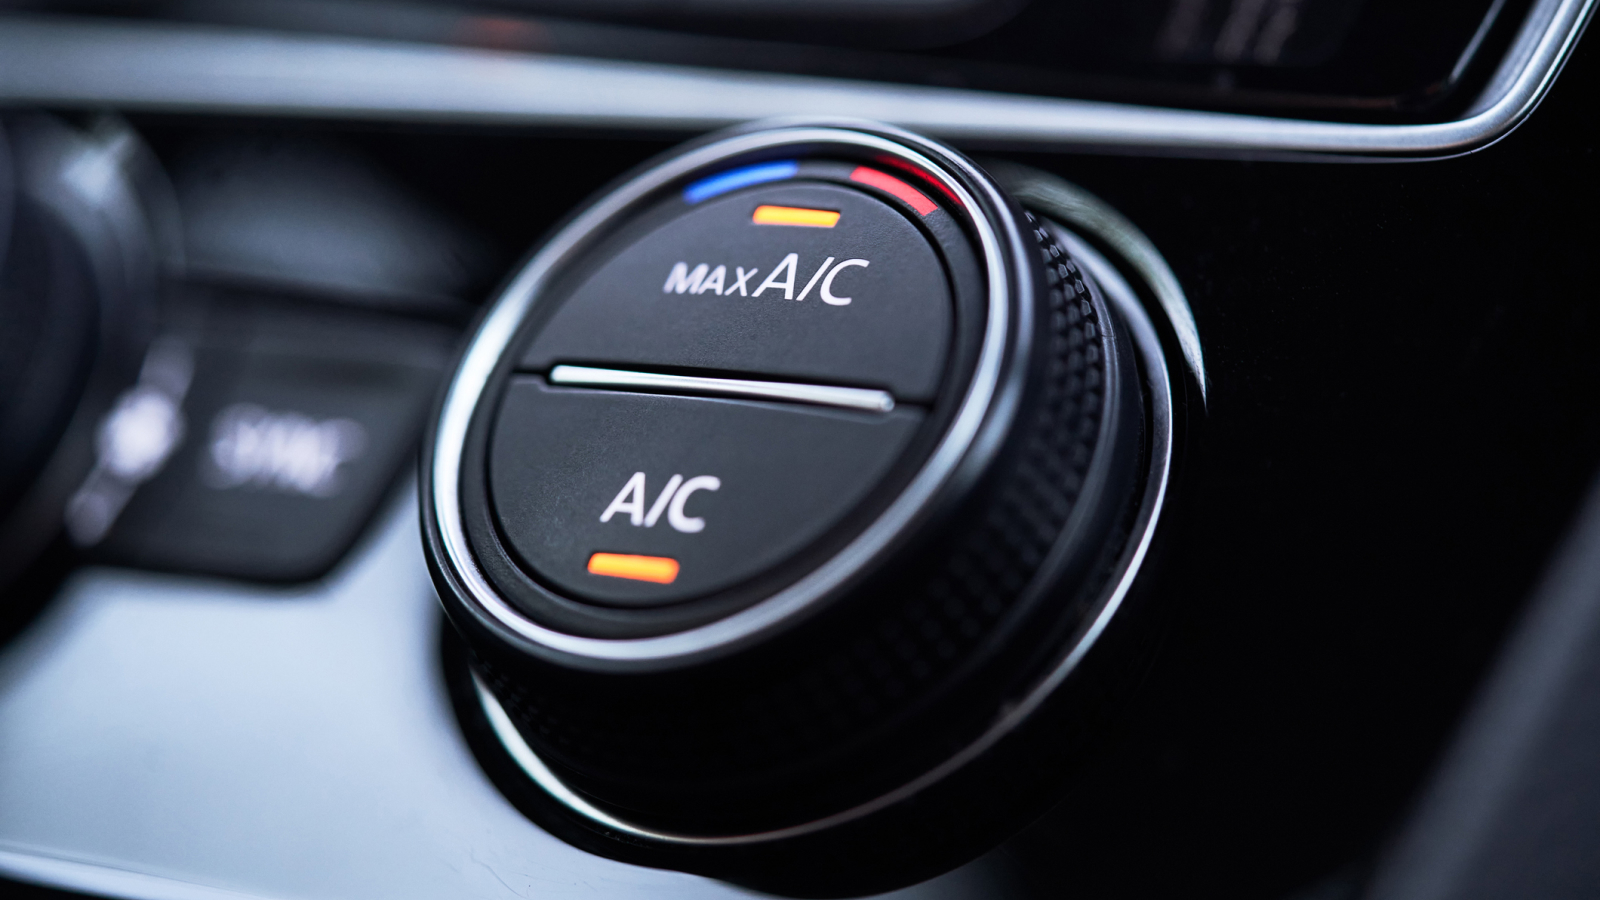 Car air conditioning set to Max A/C